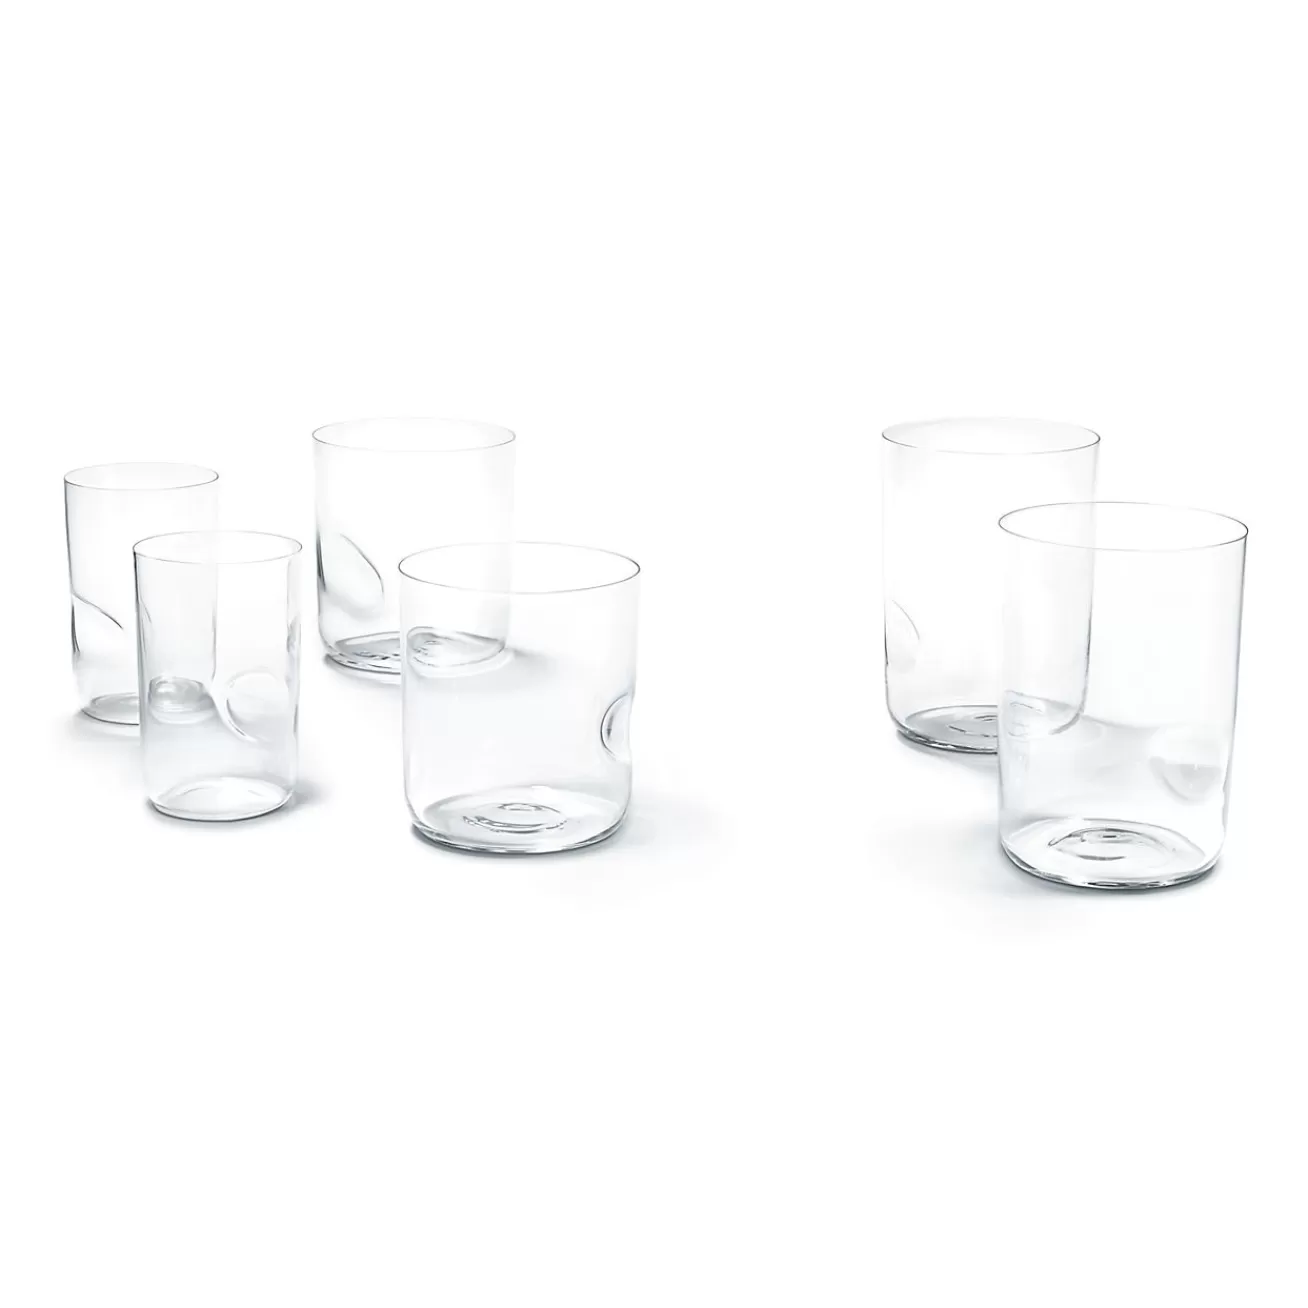 Tiffany & Co. Elsa Peretti® Thumbprint glasses in lead crystal, set of two. | ^ Business Gifts | Glassware & Barware